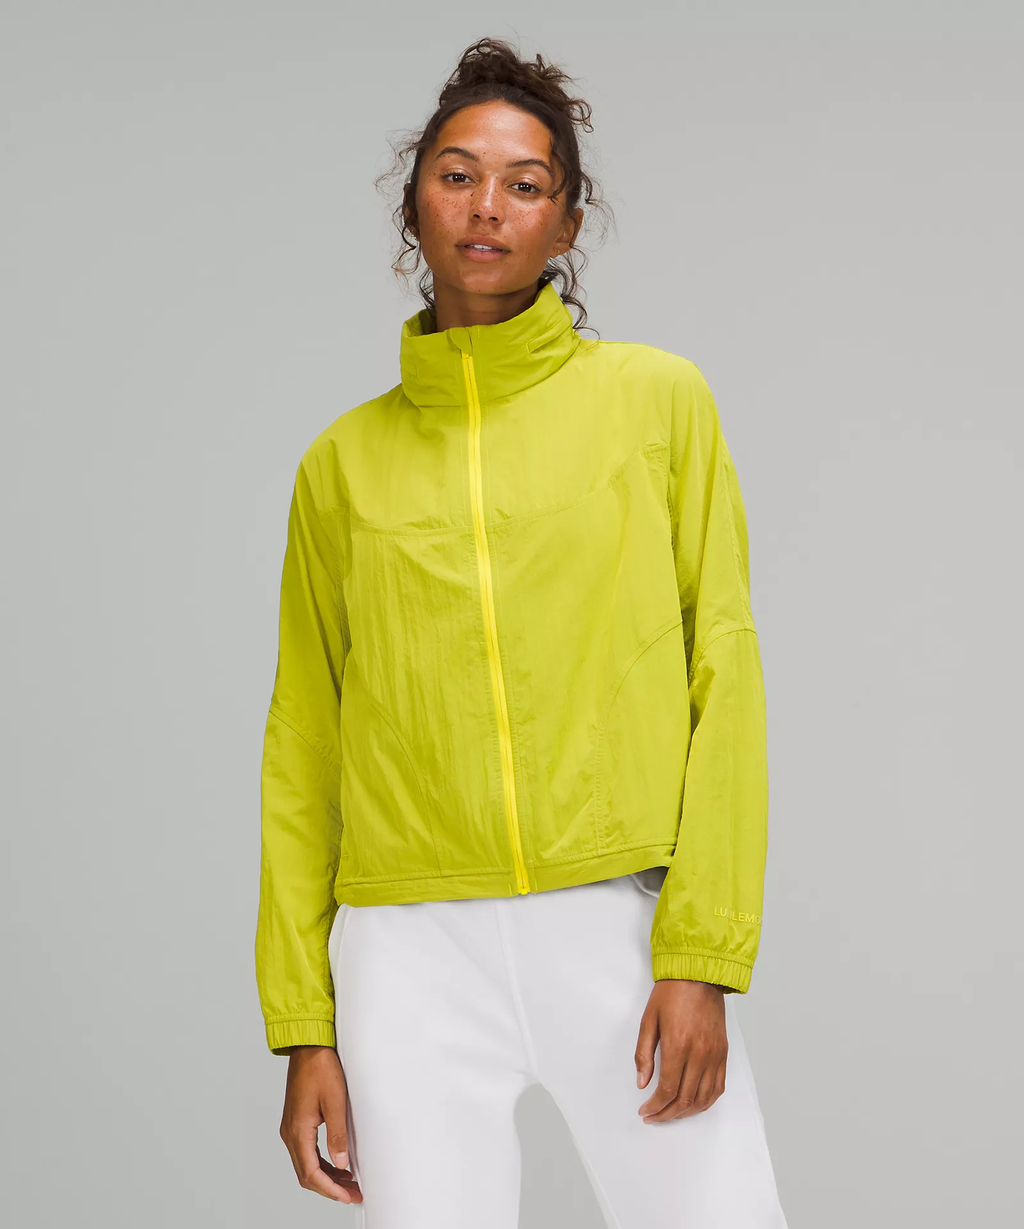 16 Fall Outerwear Pieces From Lululemon | Who What Wear